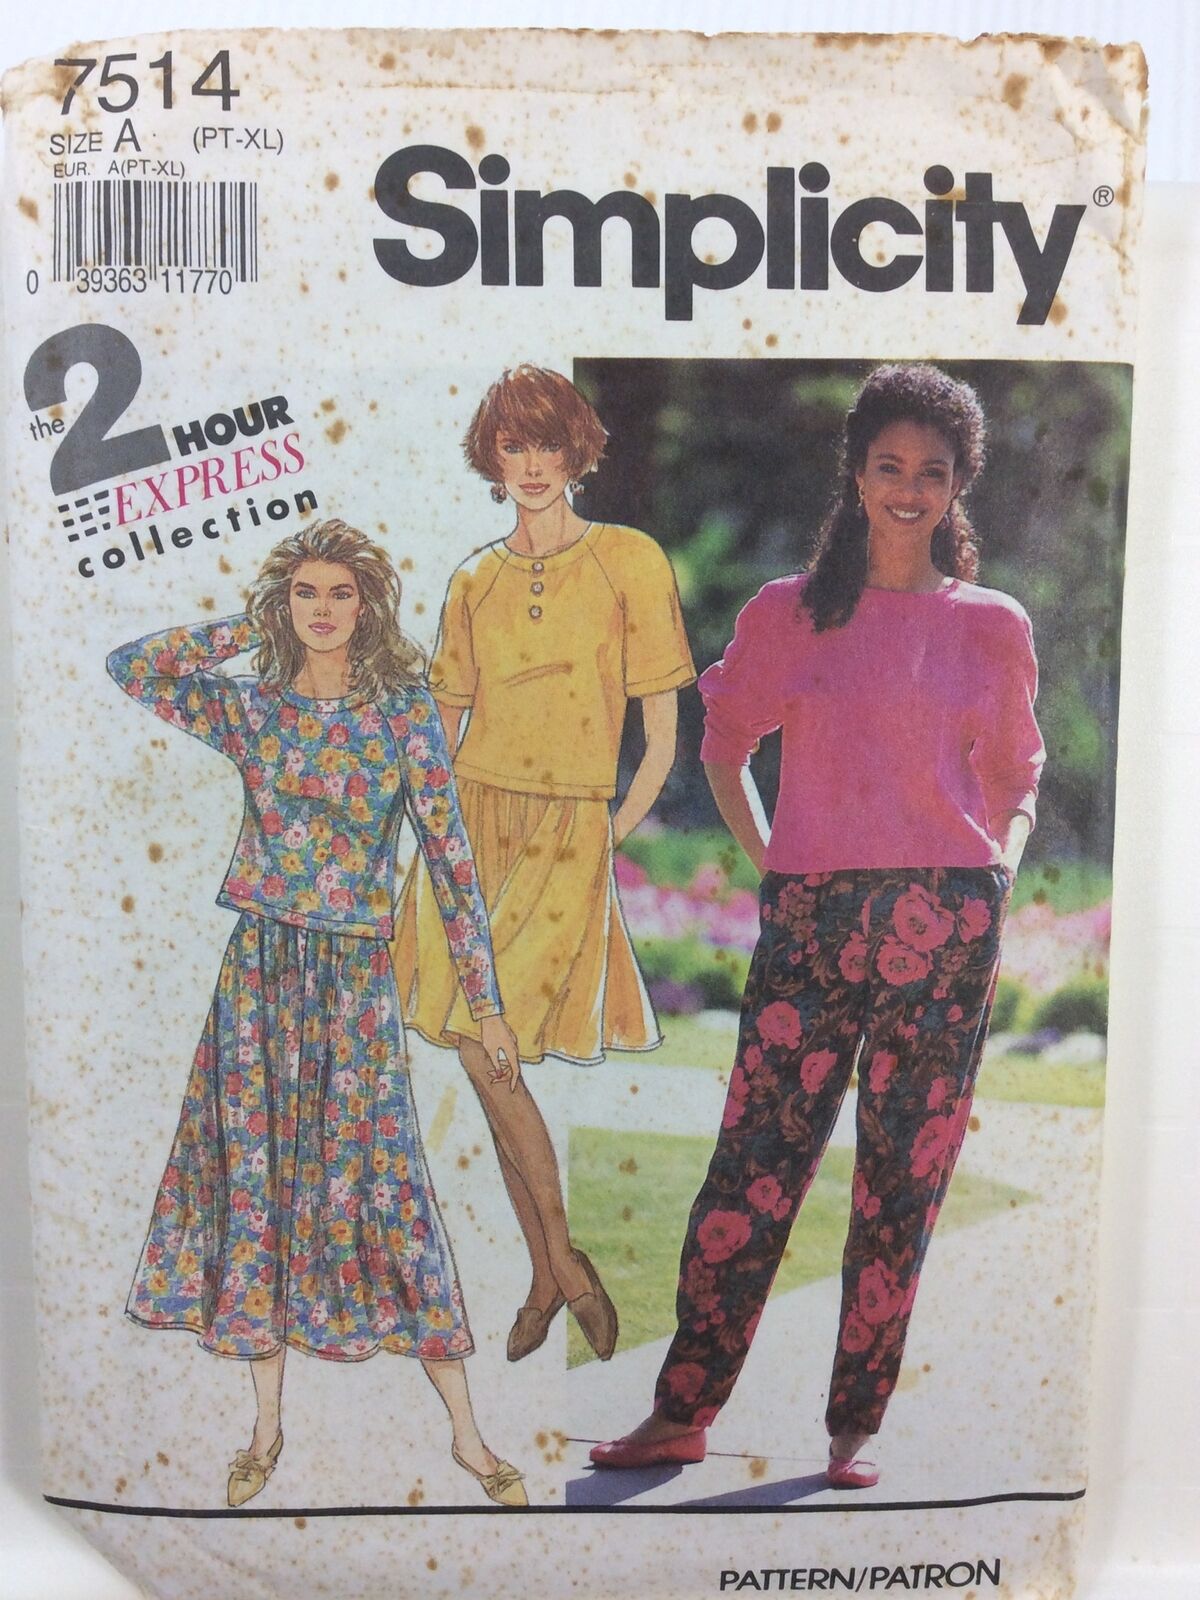 1991 Simplicity 7514 Vintage Sewing Pattern Women Skirt Pants Top Size PT to XL